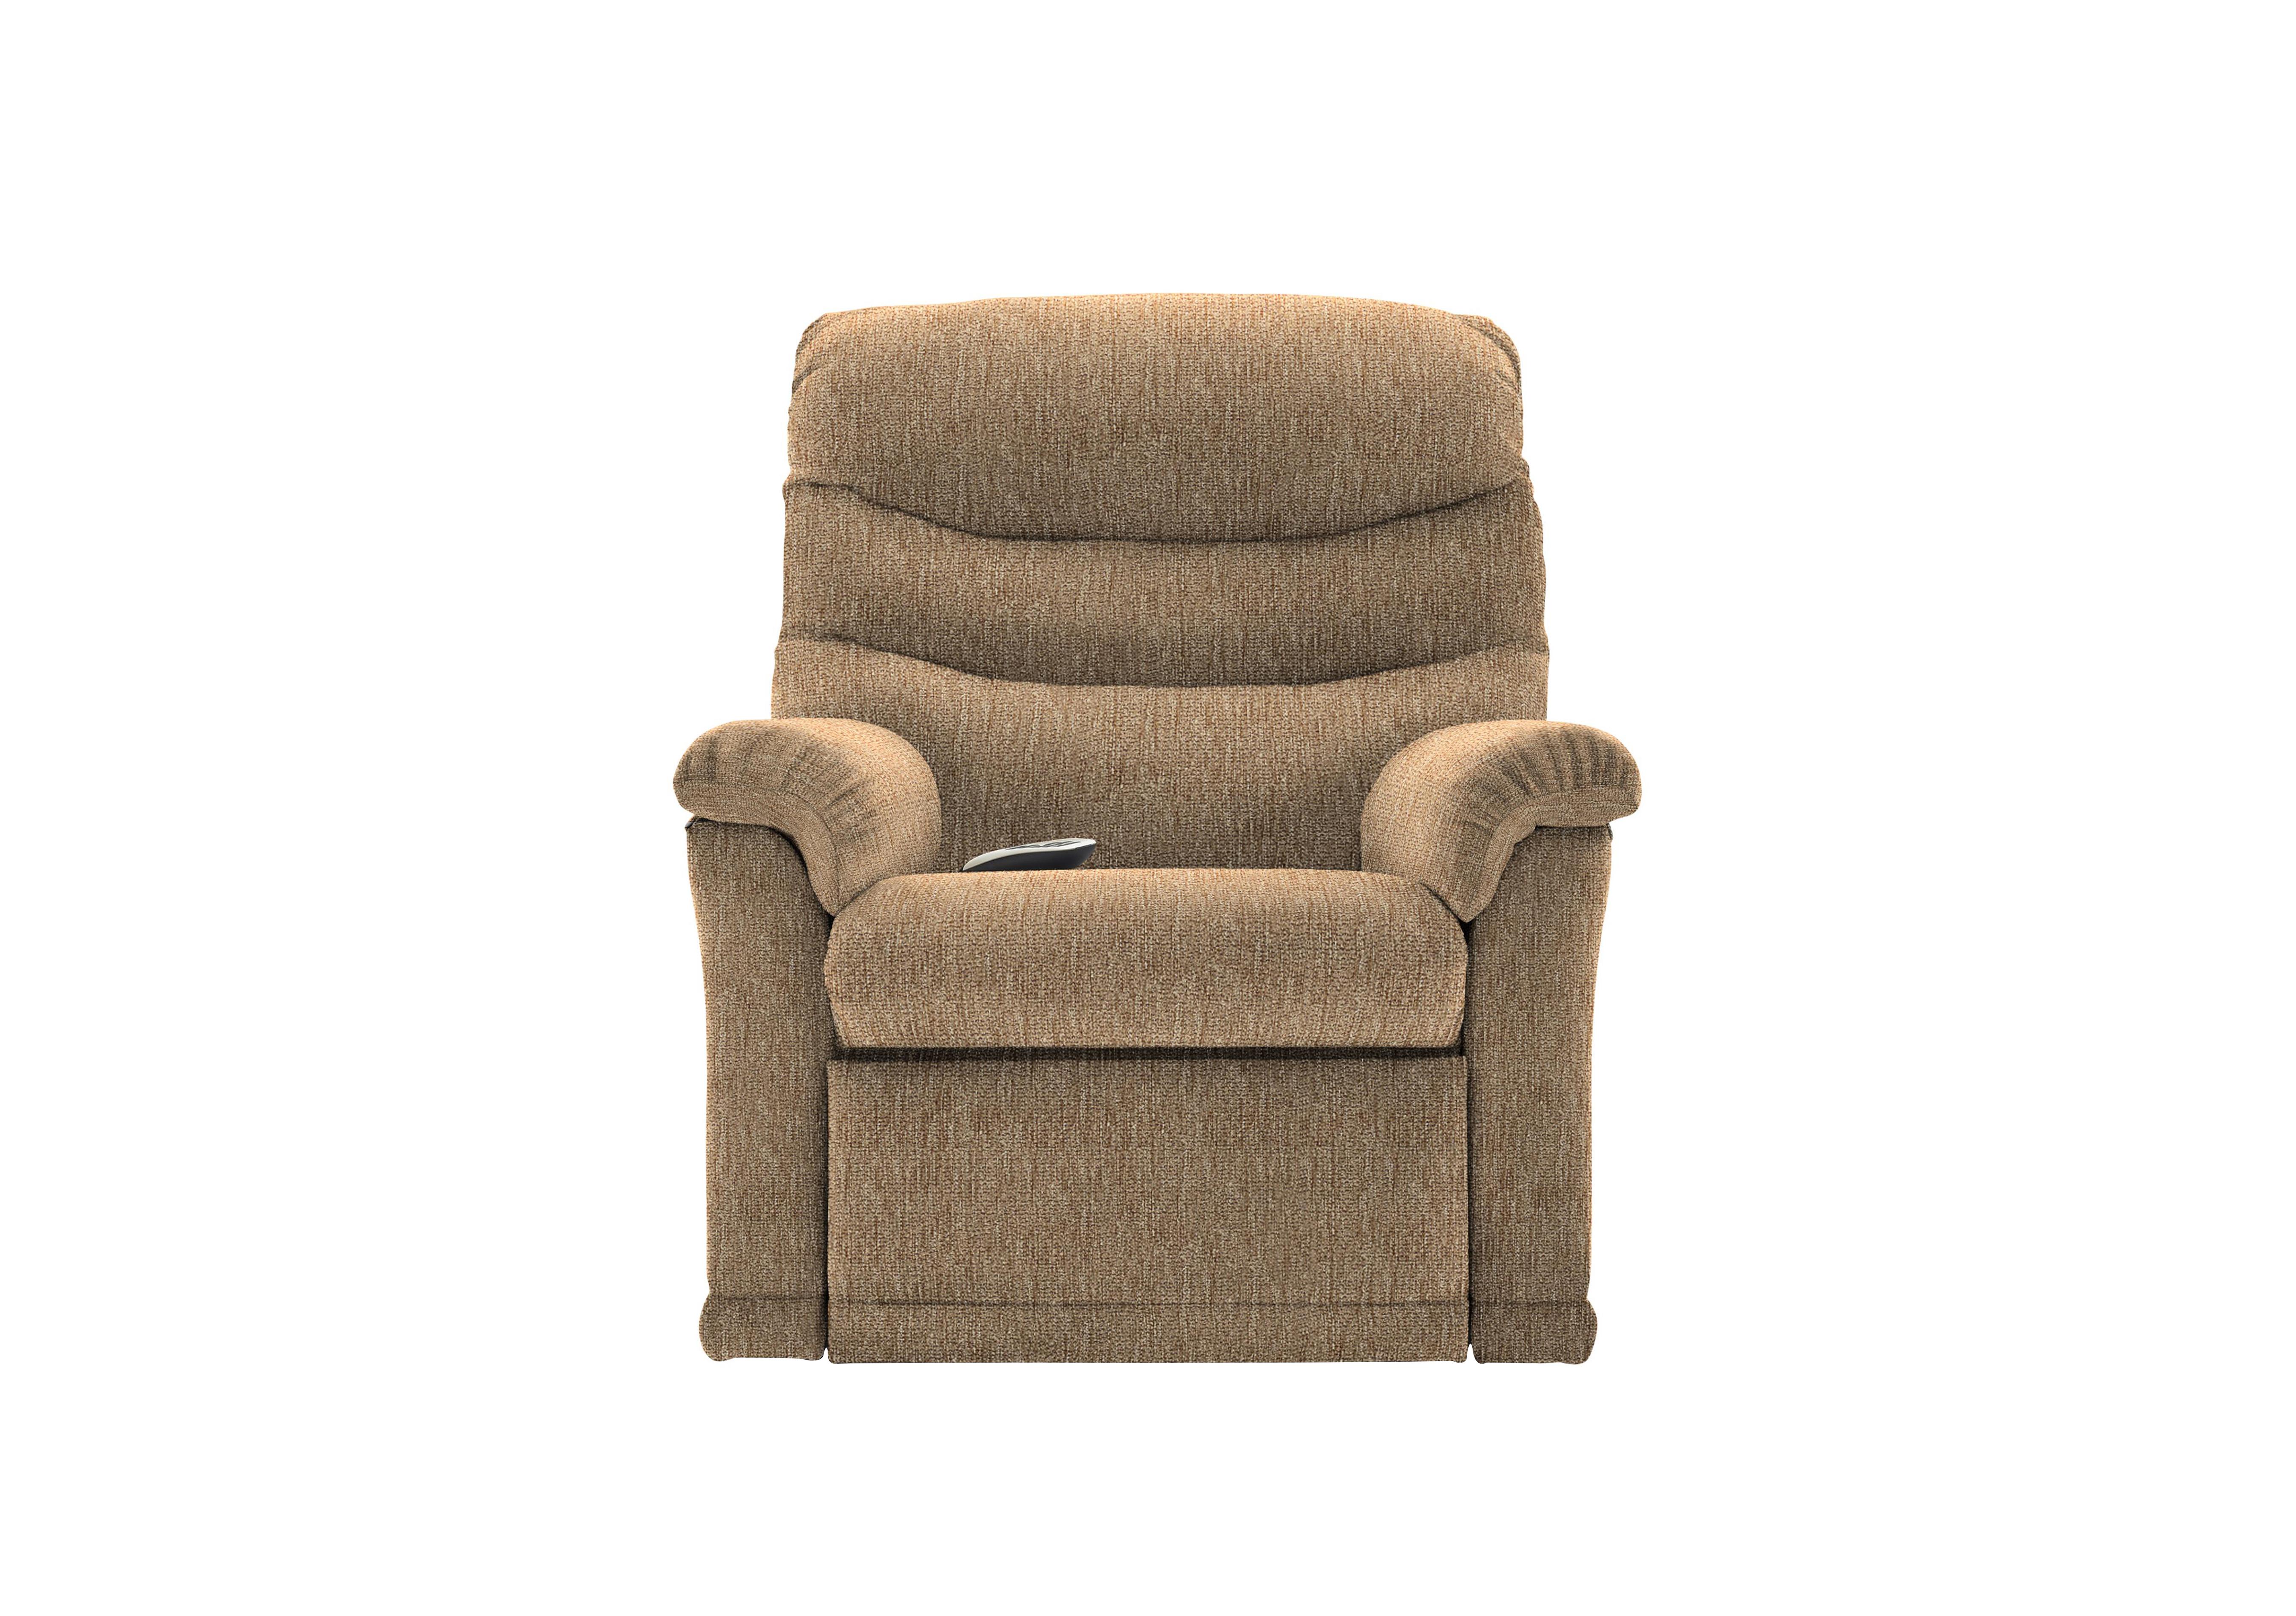 Malvern Fabric Small Rise and Recline Armchair in A070 Boucle Cocoa on Furniture Village